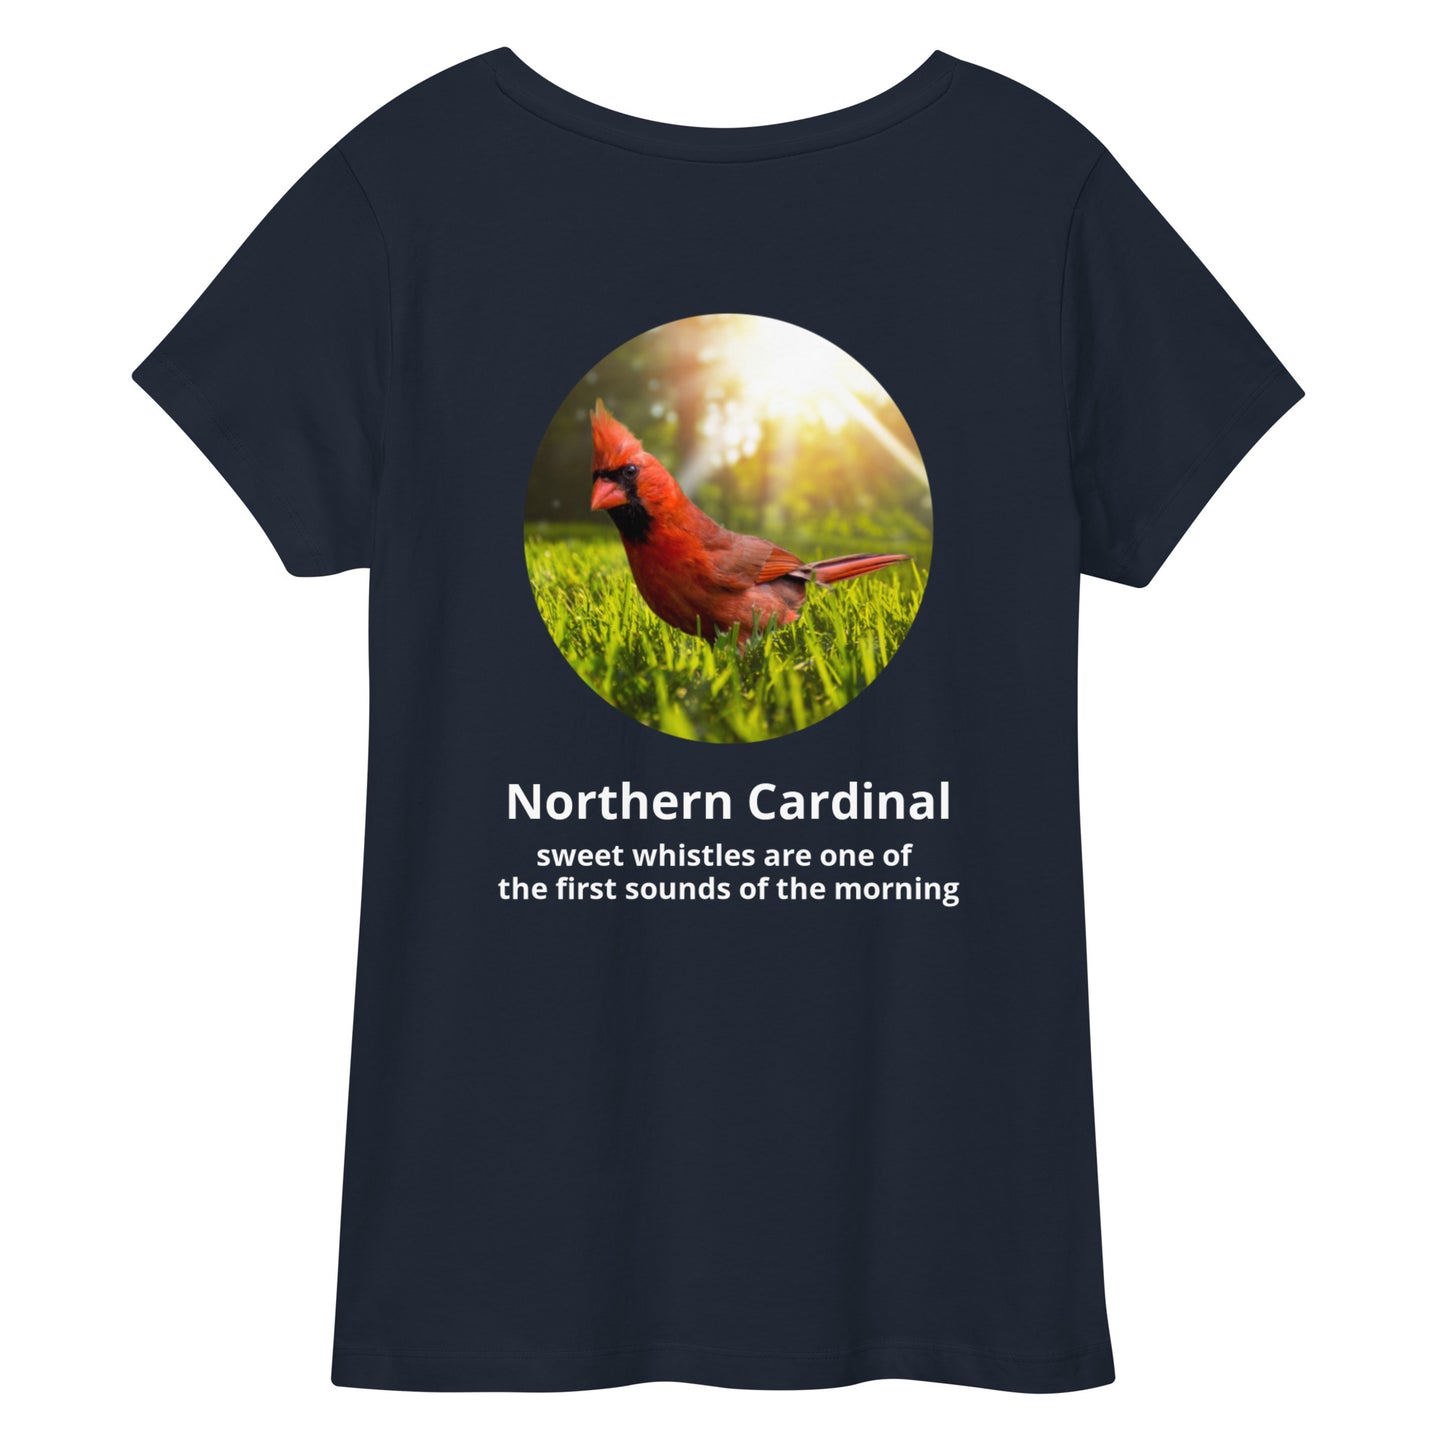 Norther Cardinal Women’s fitted v-neck t-shirt